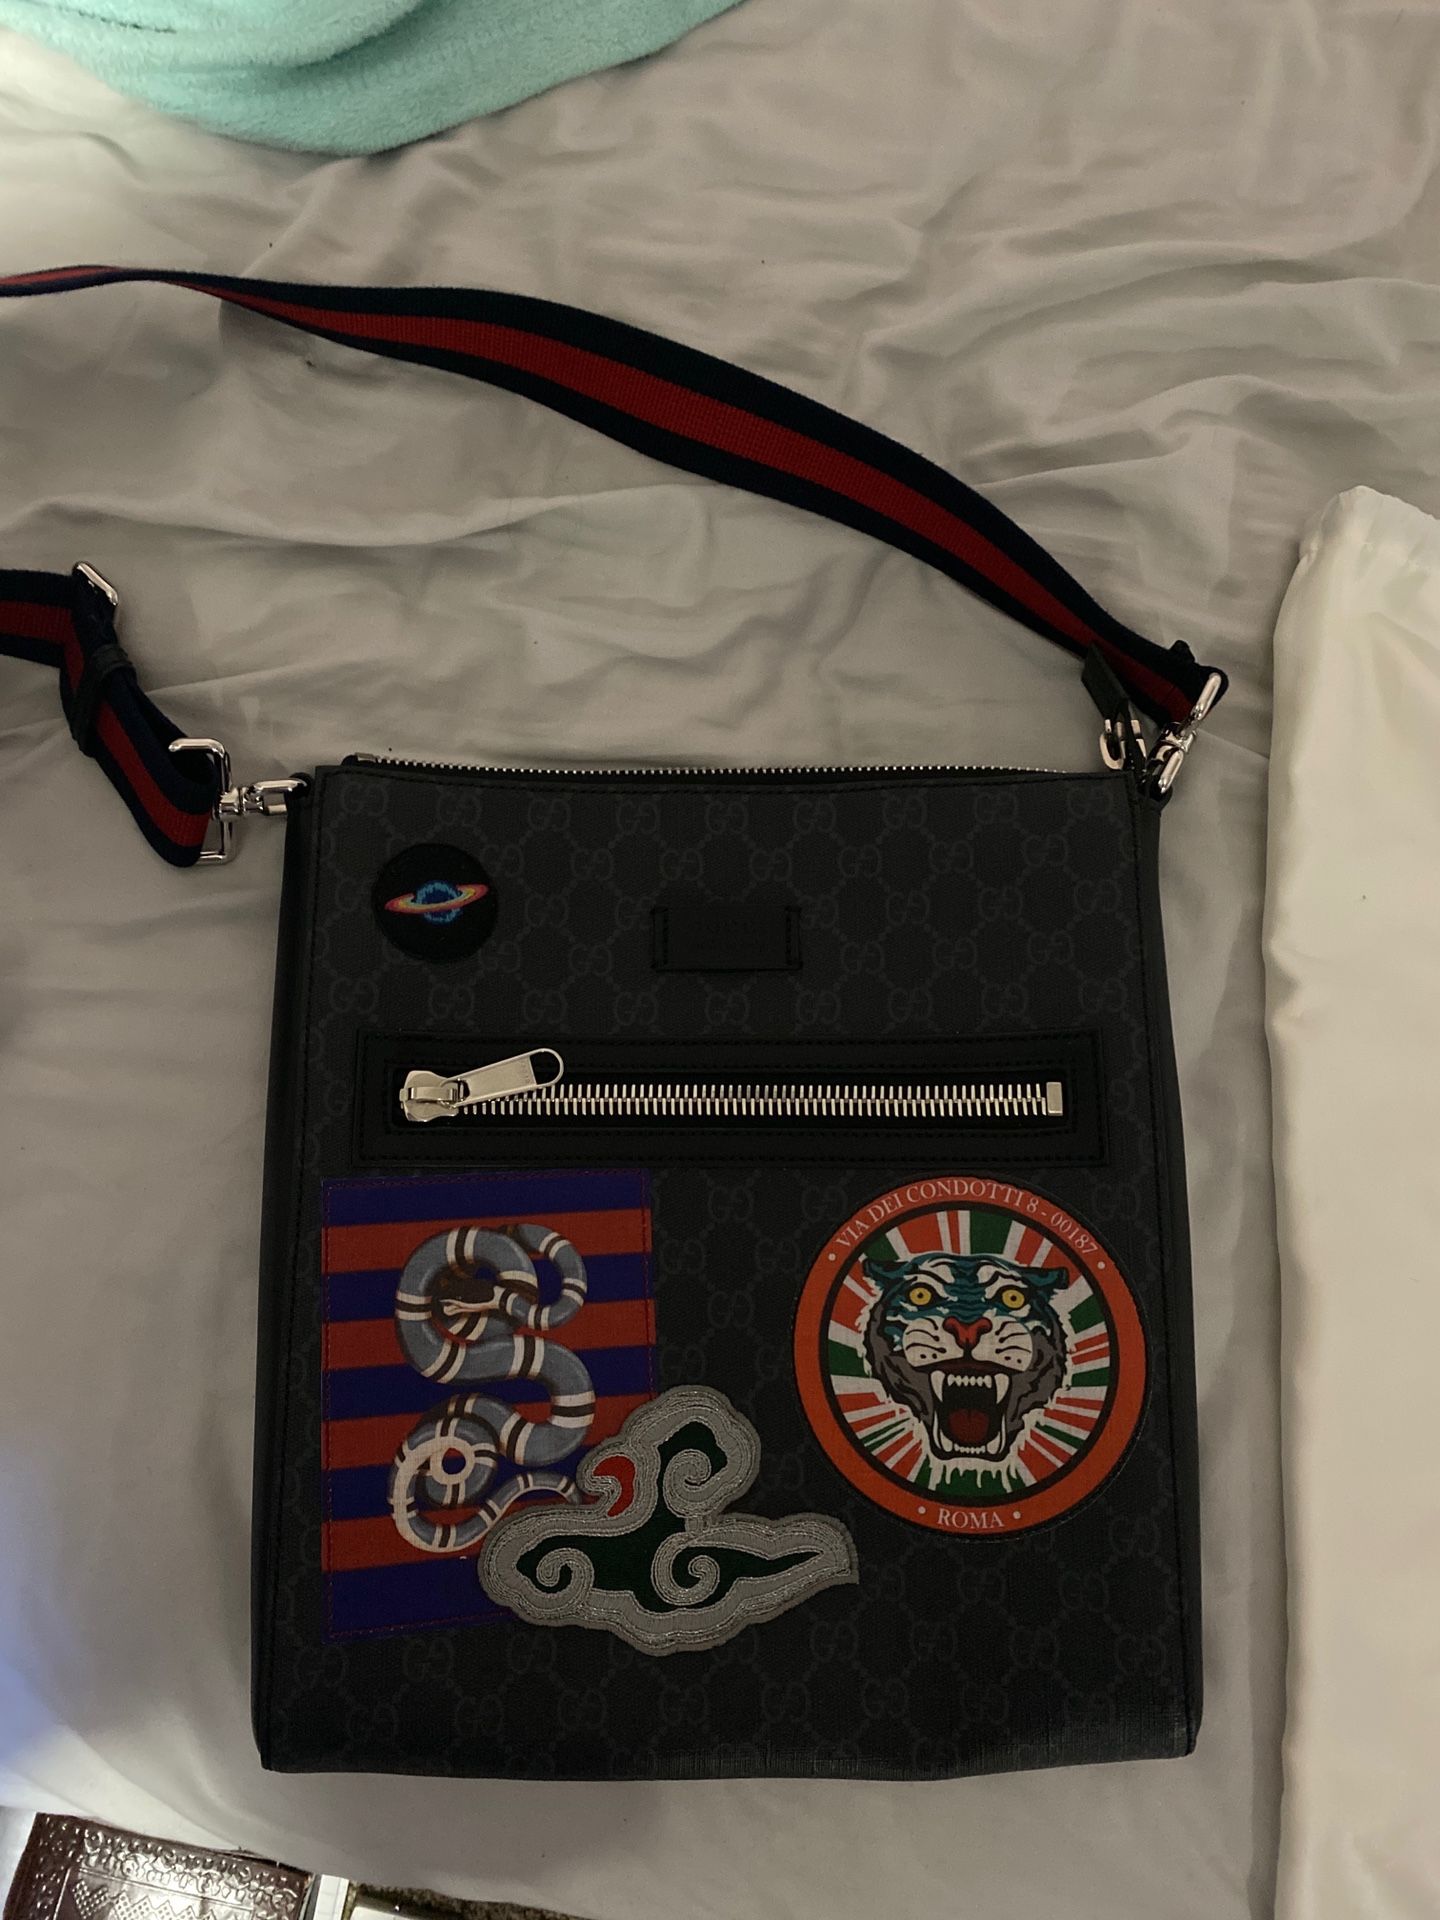 Mint condition Gucci bag from Paris